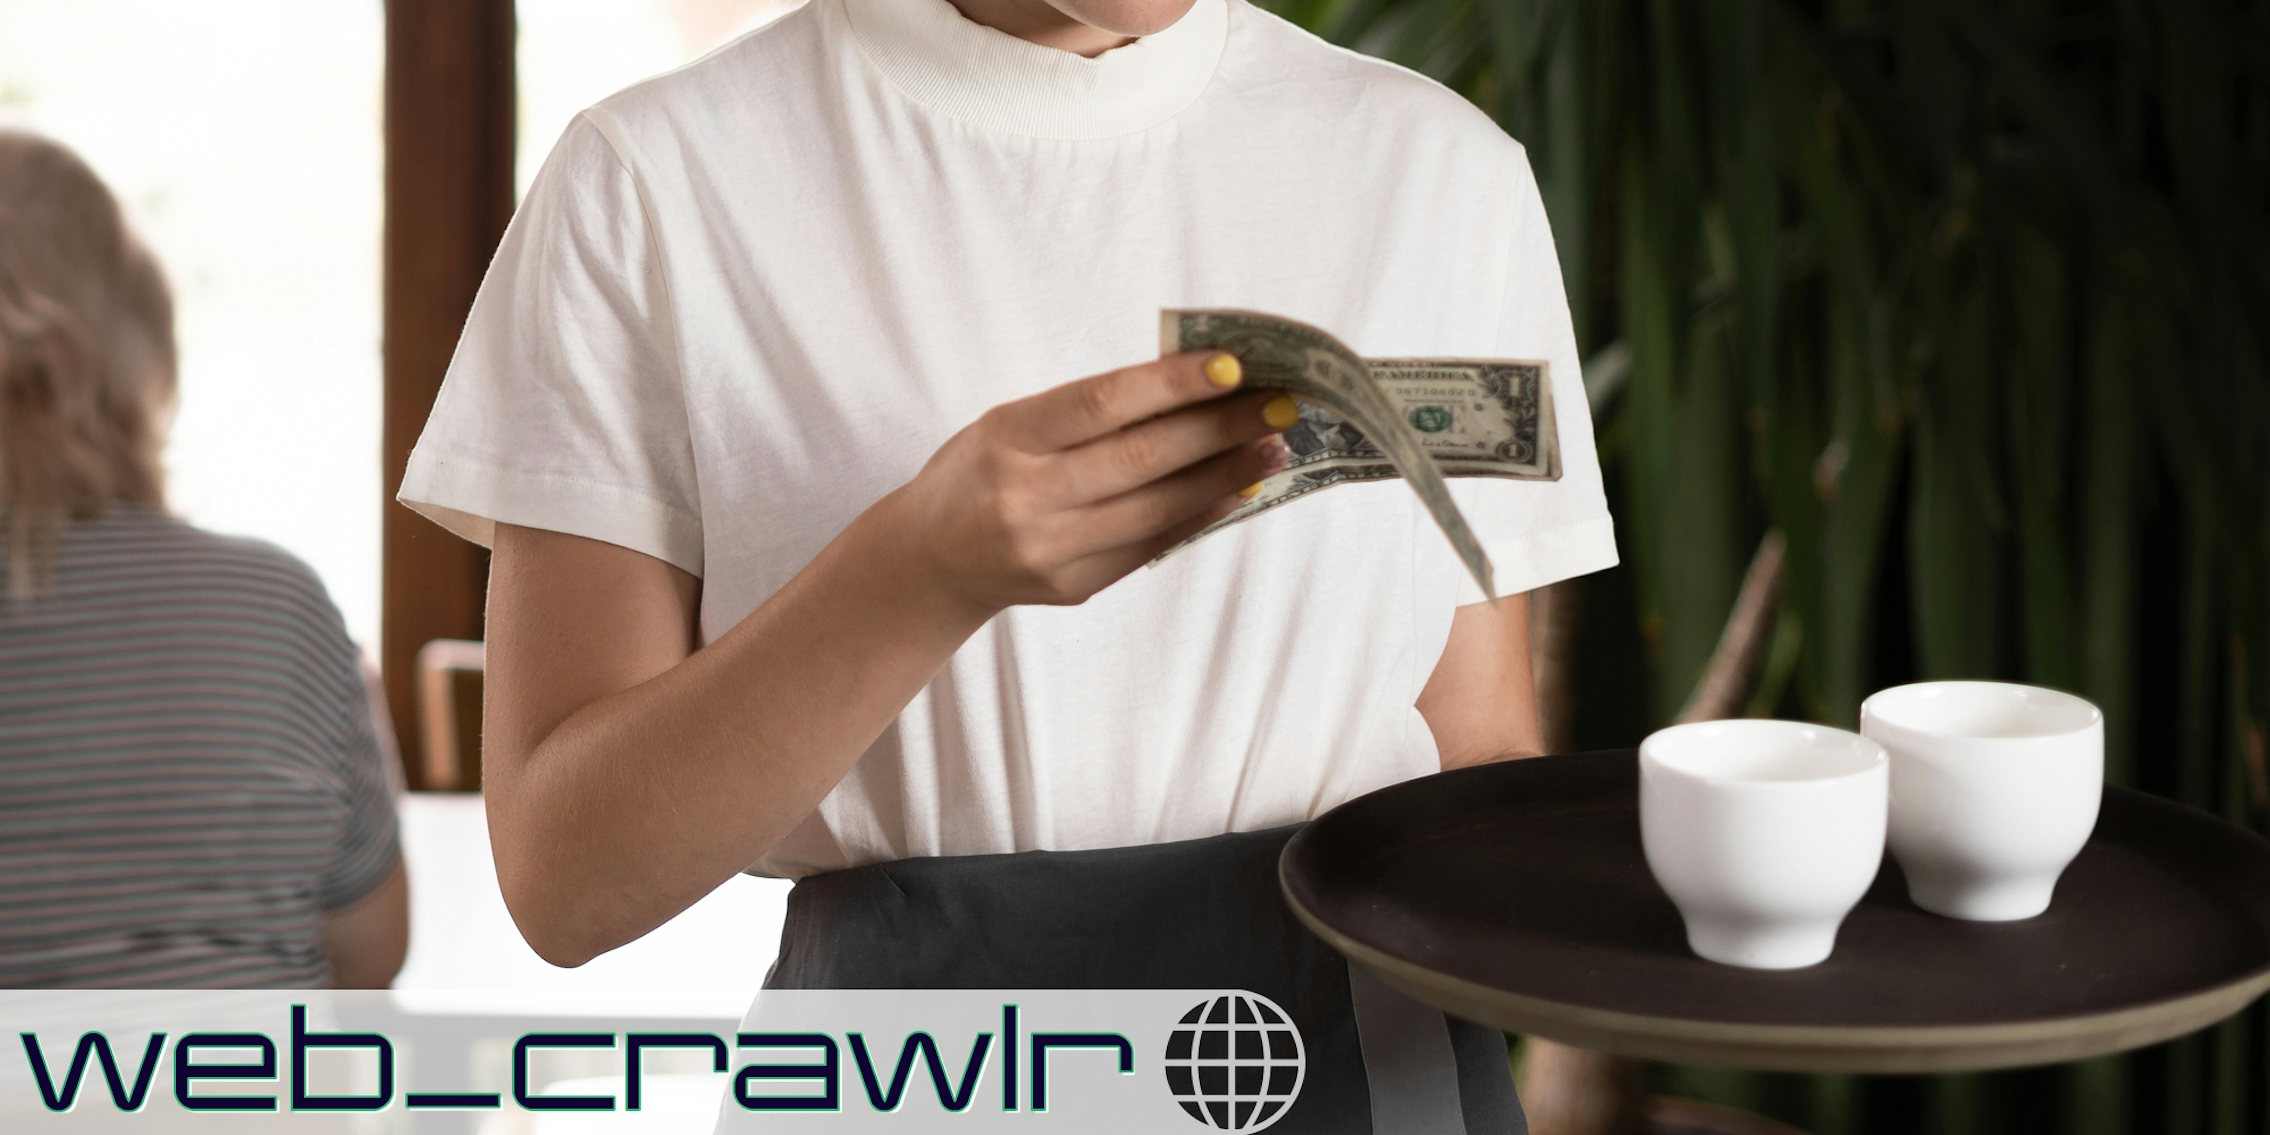 A server looking at money while holding a platter with two coffee cups. The Daily Dot newsletter web_crawlr logo is in the bottom left corner.